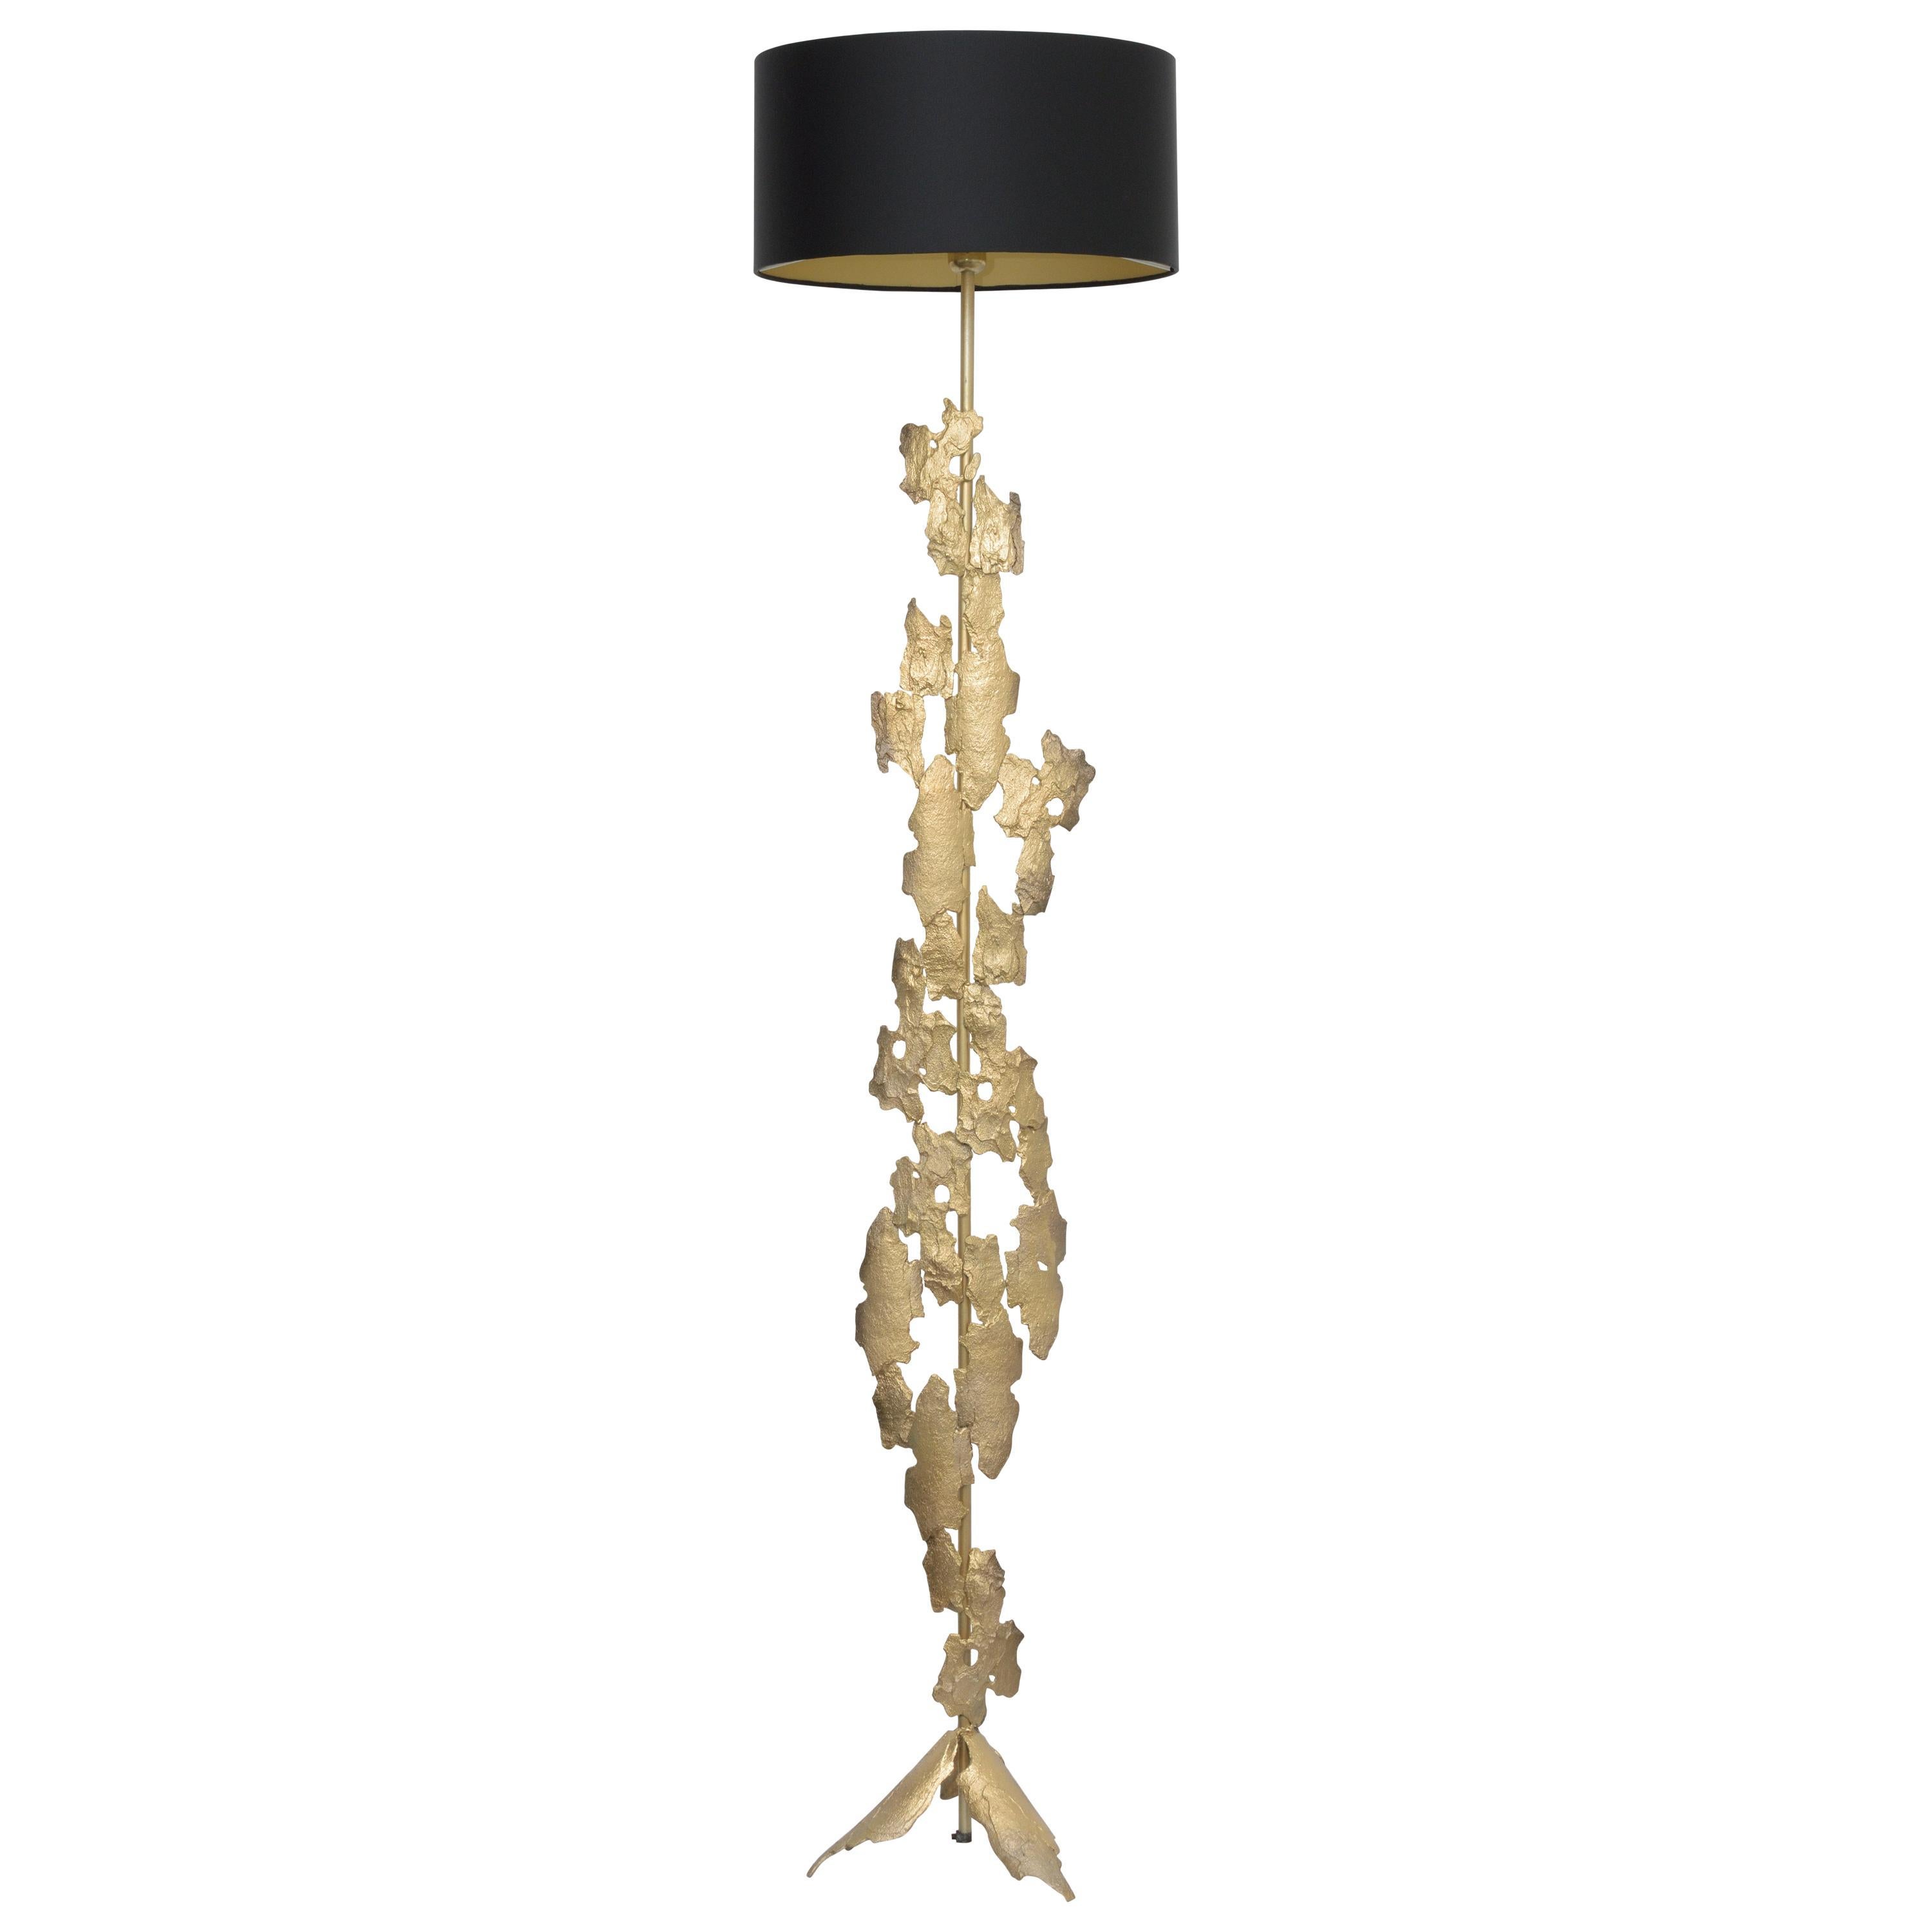  Bronze Floor Lamp 'Tree bark'  - Hand crafted and cast